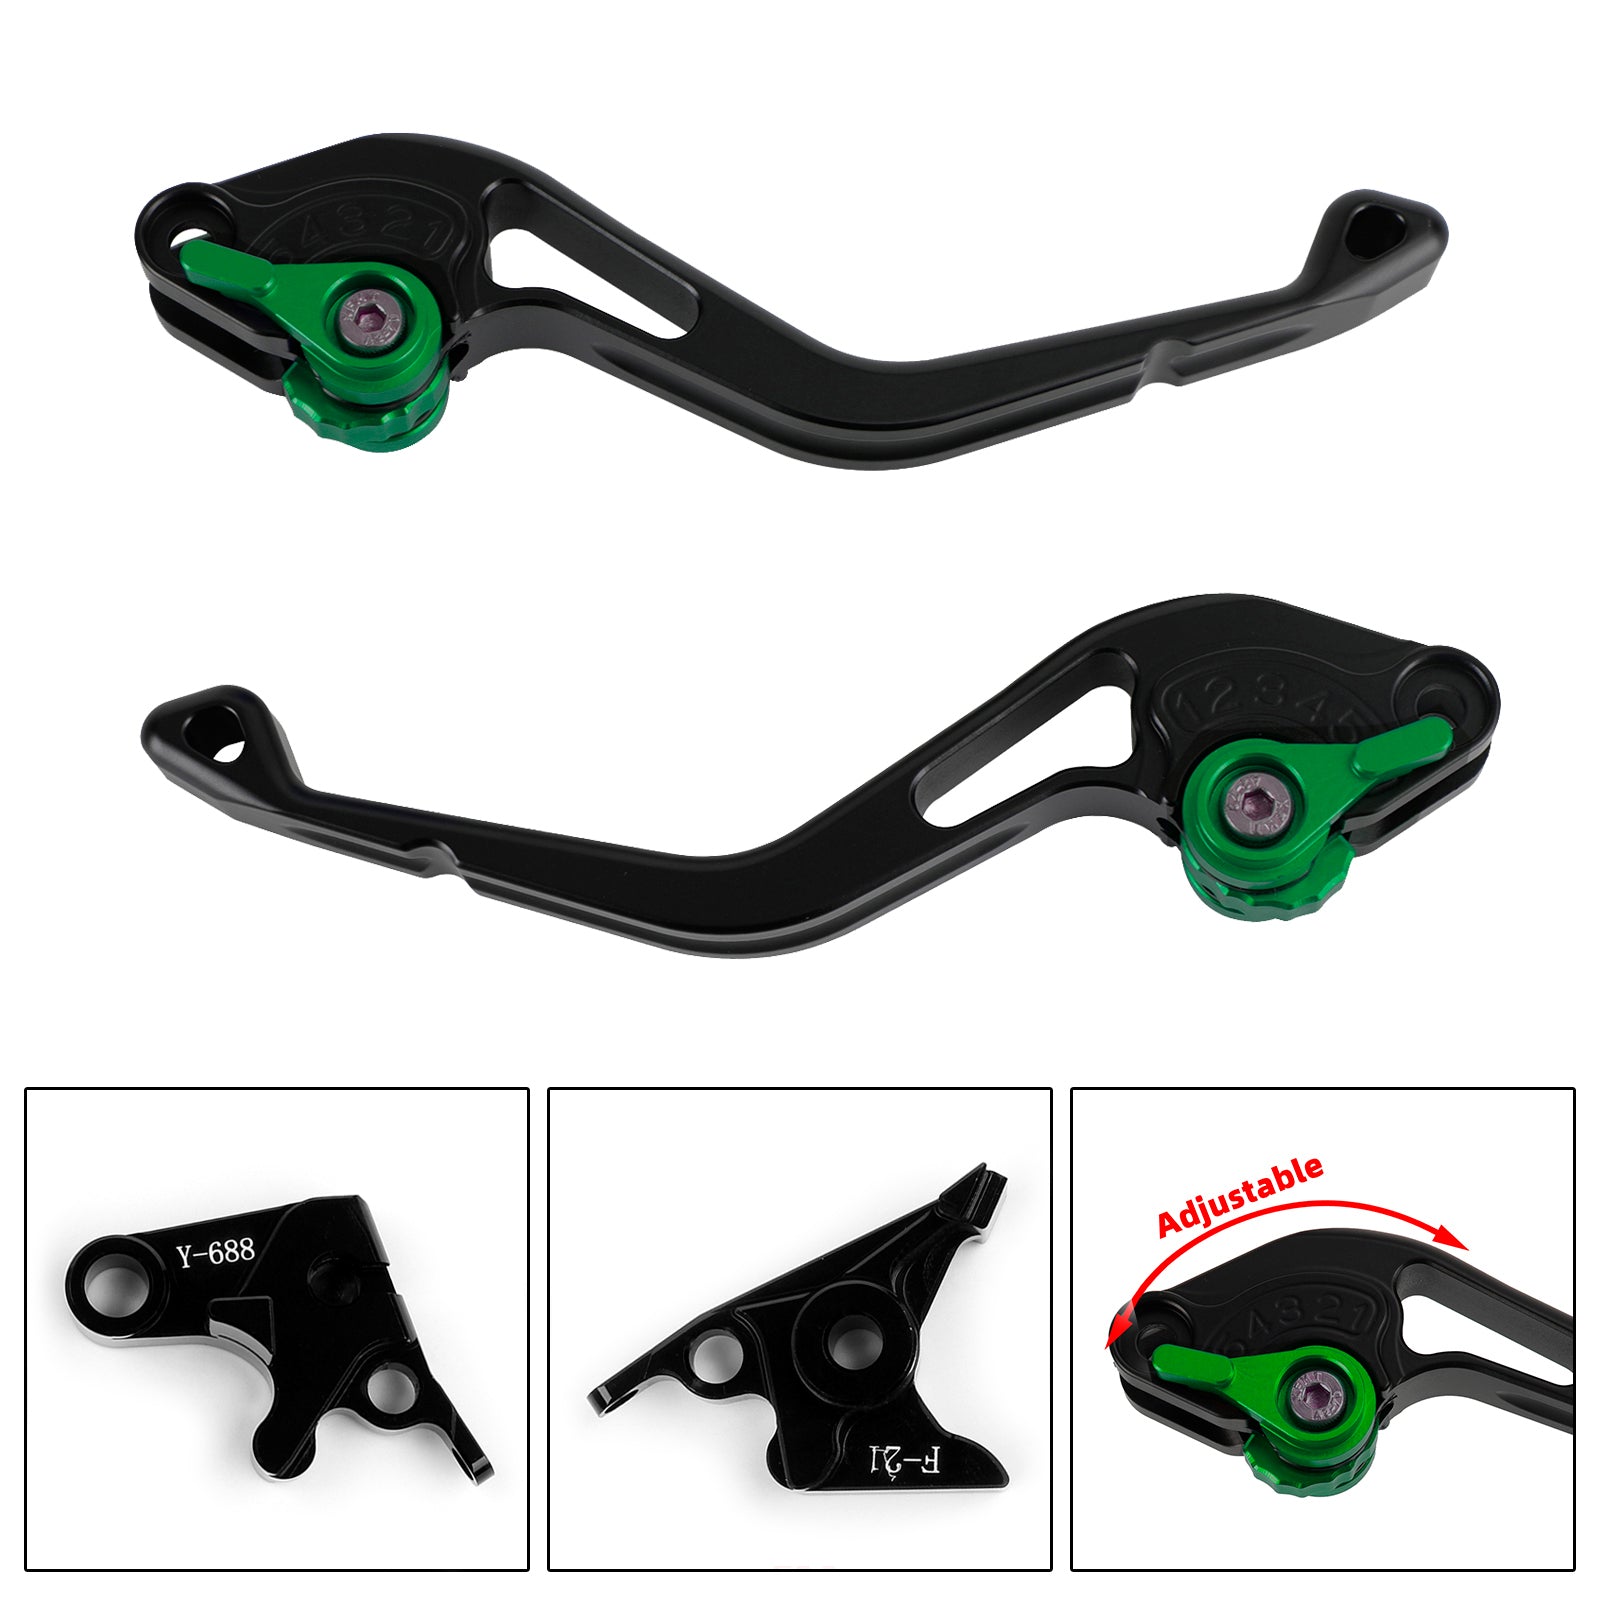 NEW Short Clutch Brake Lever fit for Yamaha YZF R1 1999-2001